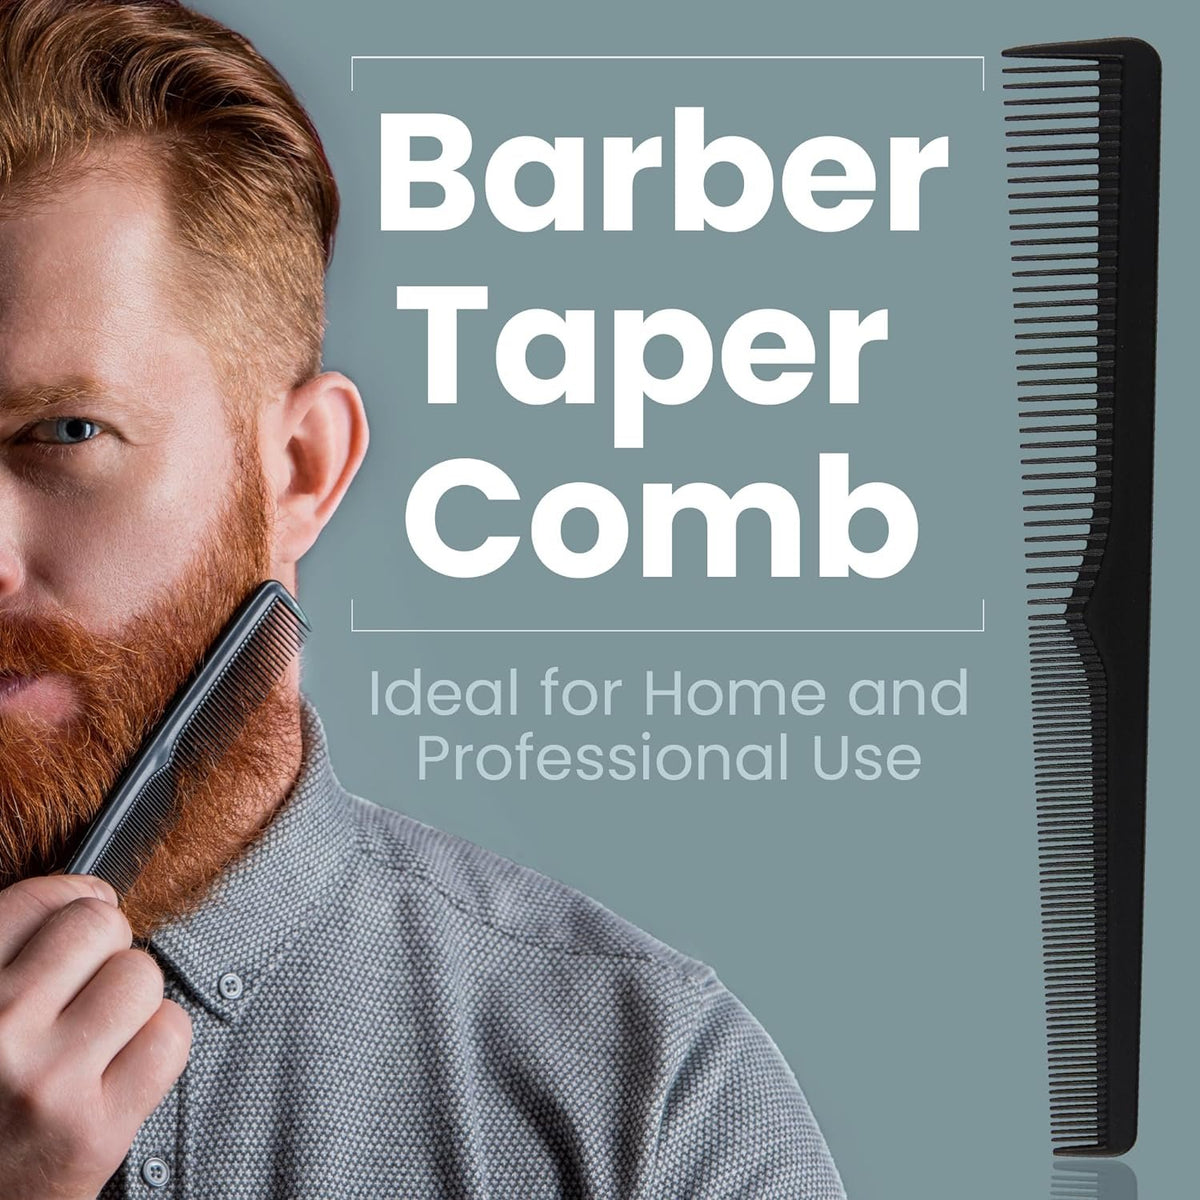 Premium Carbon Fiber Barber Combs - 4 Pack - Heat Resistant Barbers Comb, 7.3 Inch - Ideal for Home and Professional Use, Taper Comb Barber Fading Comb